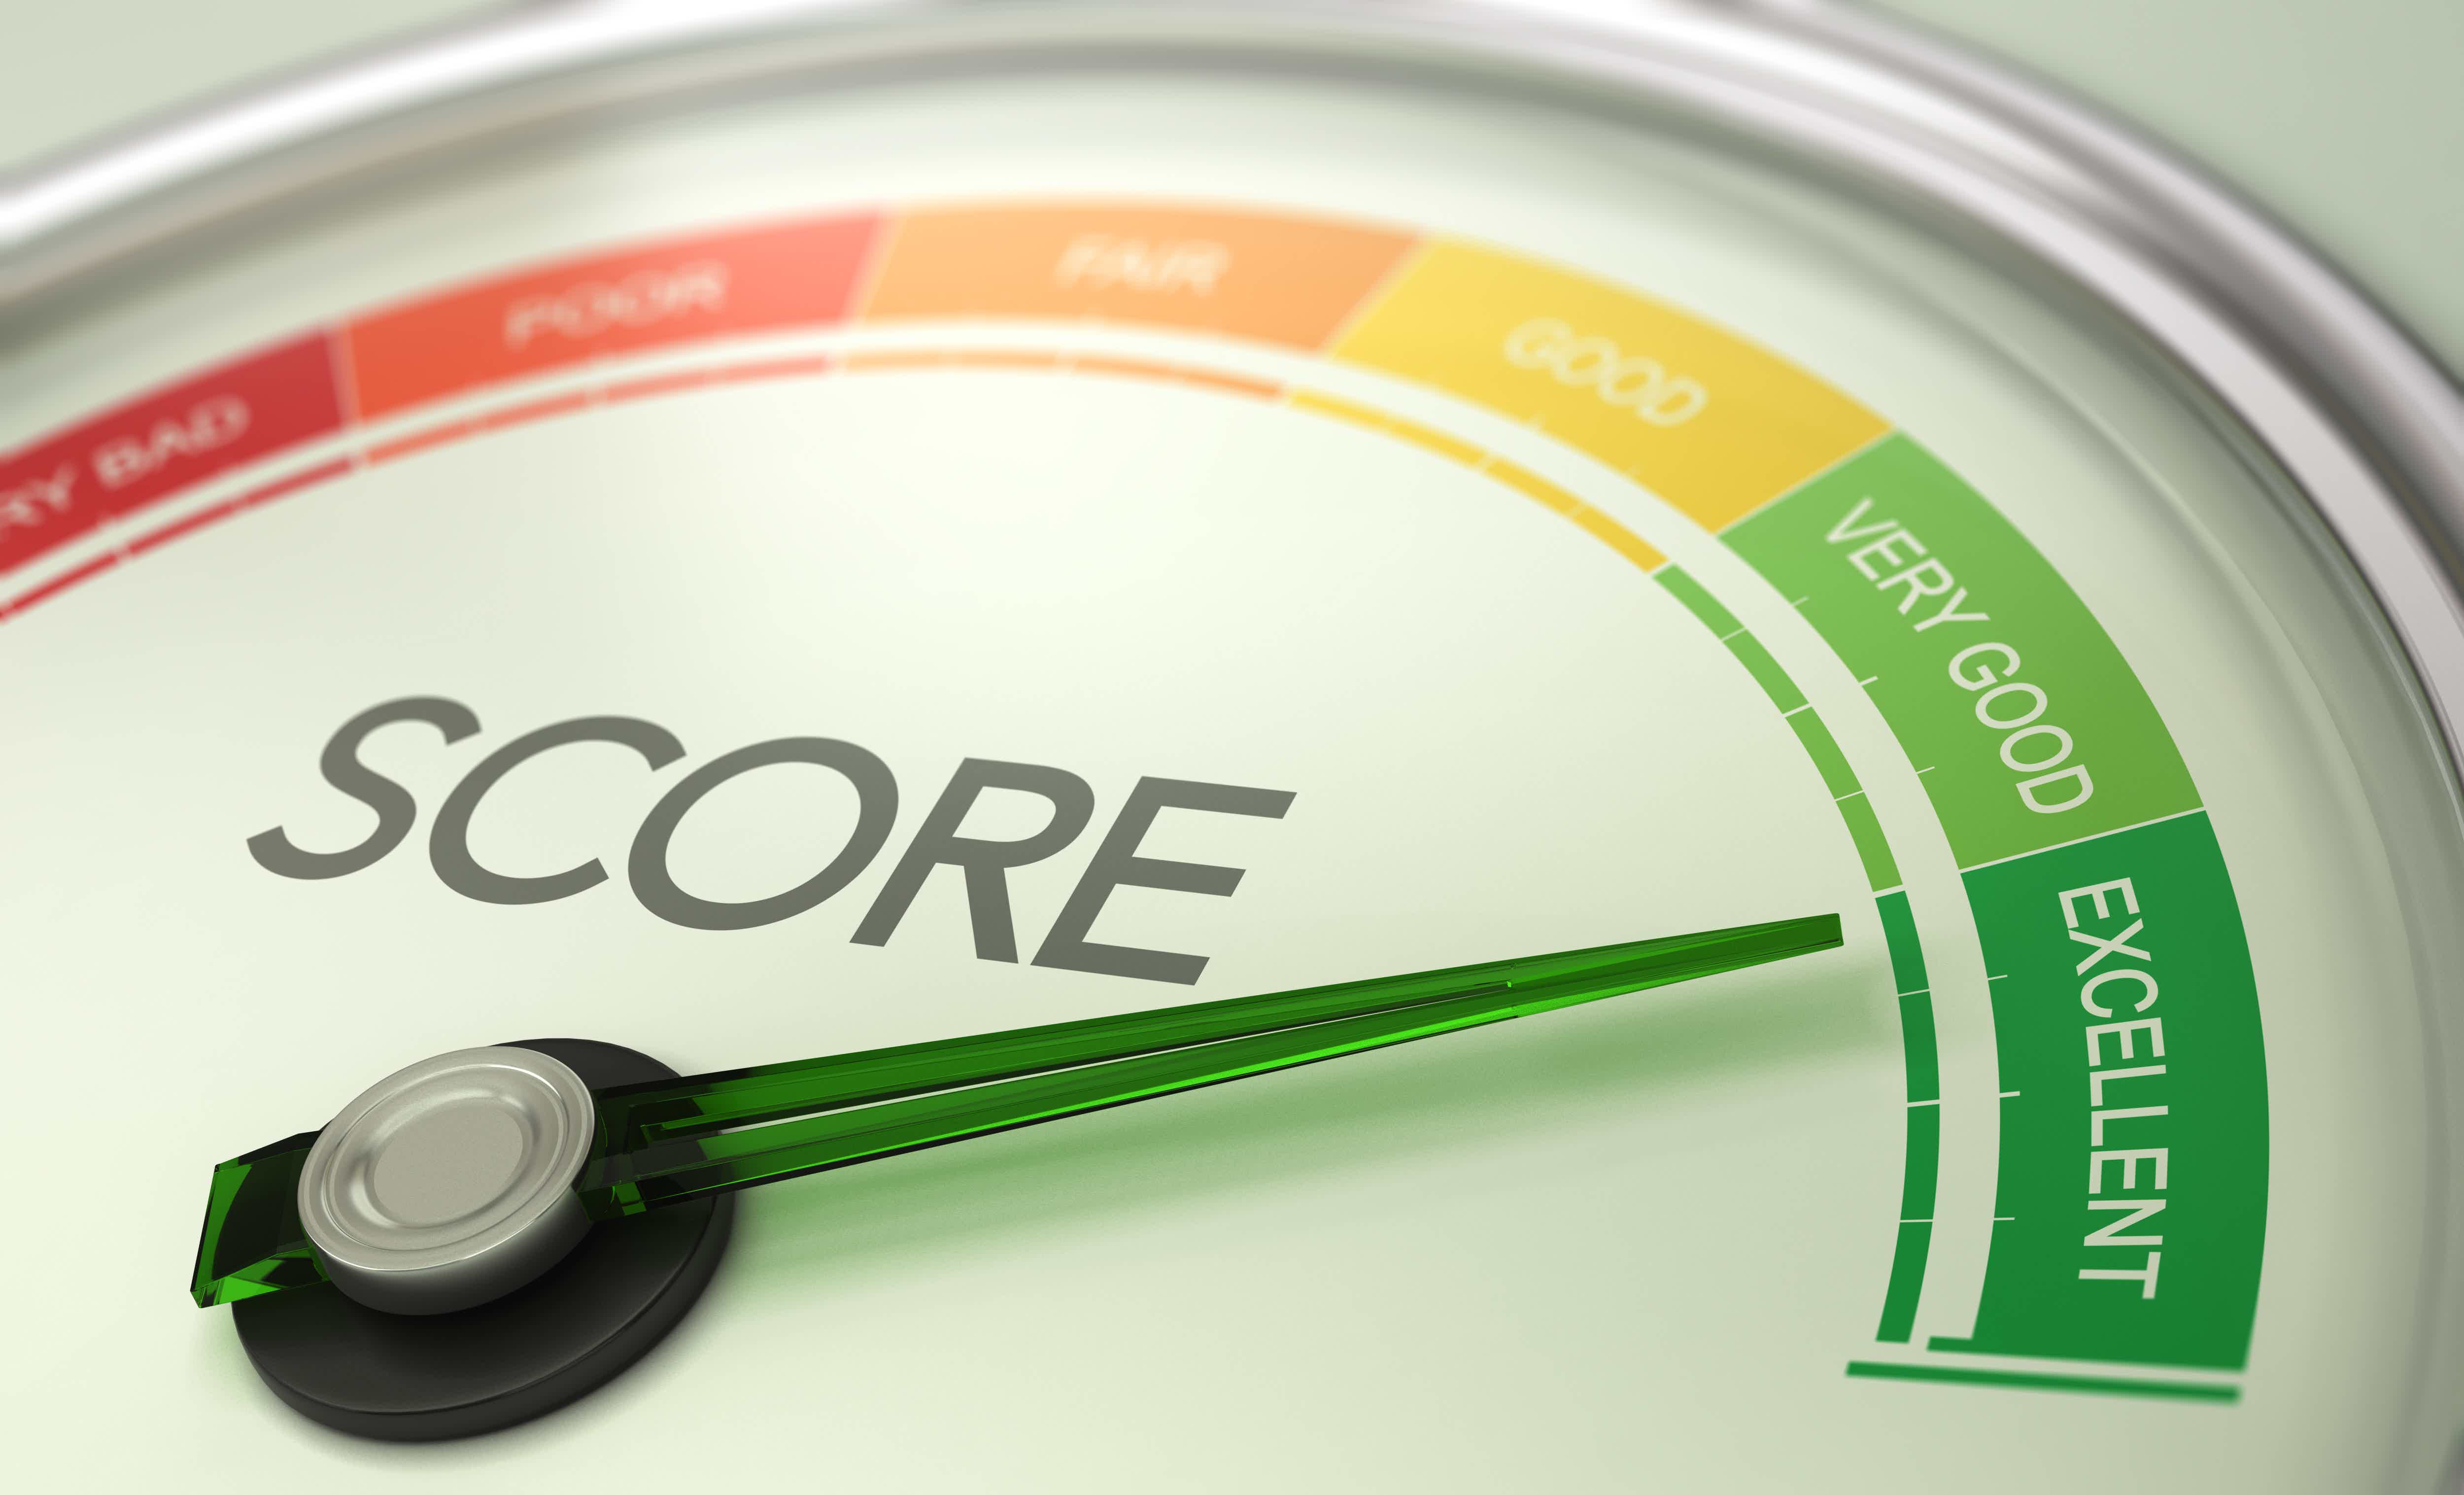 Learn how to get an excellent credit score! Source: Adobe Stock.